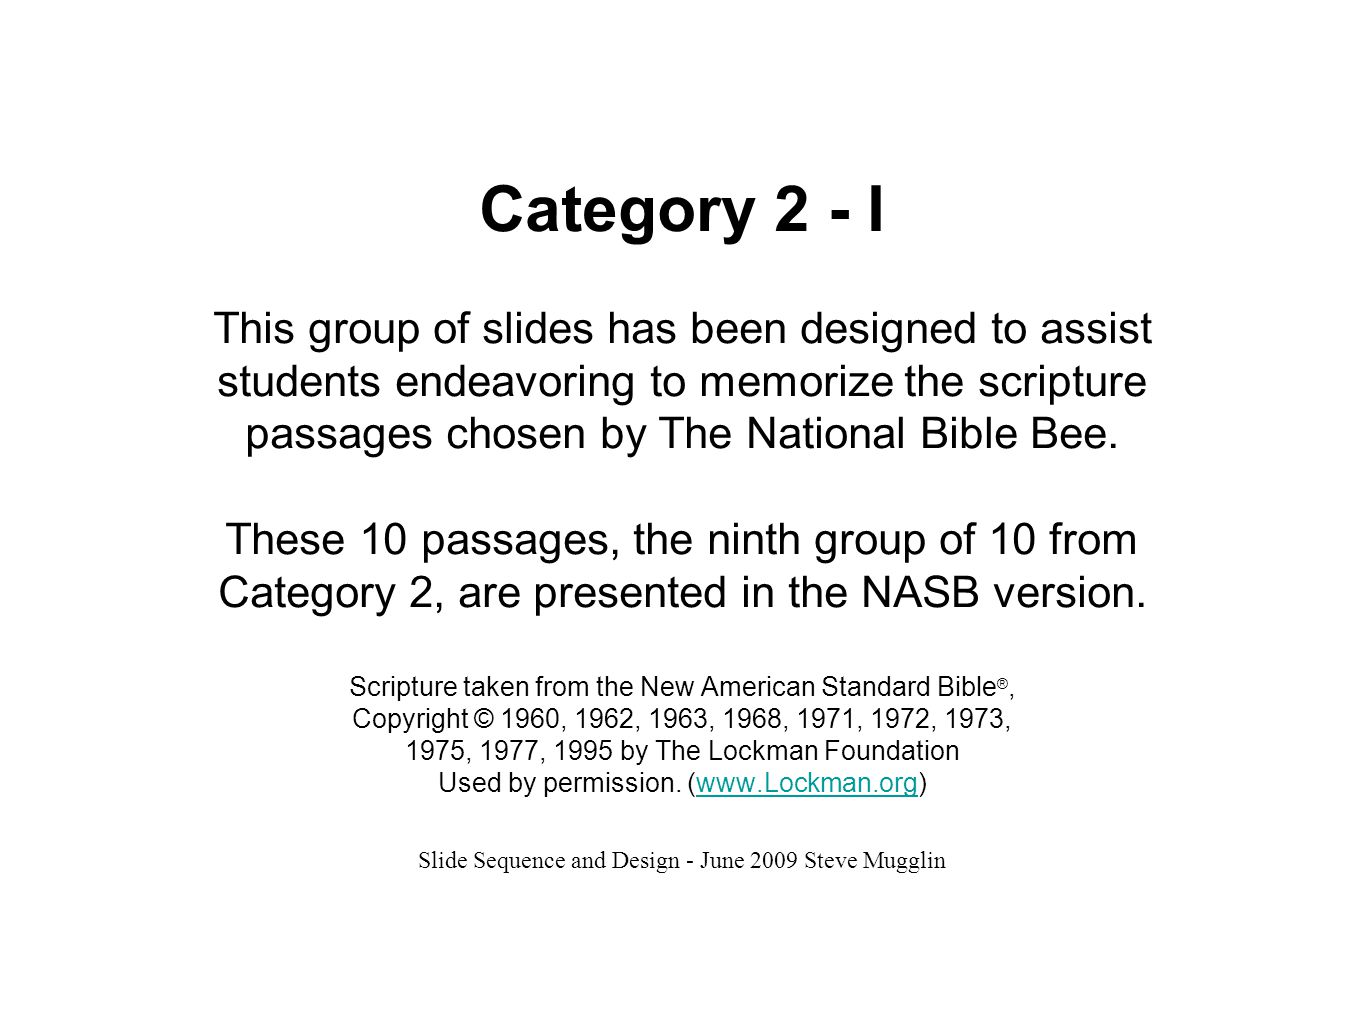 Category 2 - I This group of slides has been designed to assist students endeavoring to memorize the scripture passages chosen by The National Bible Bee.